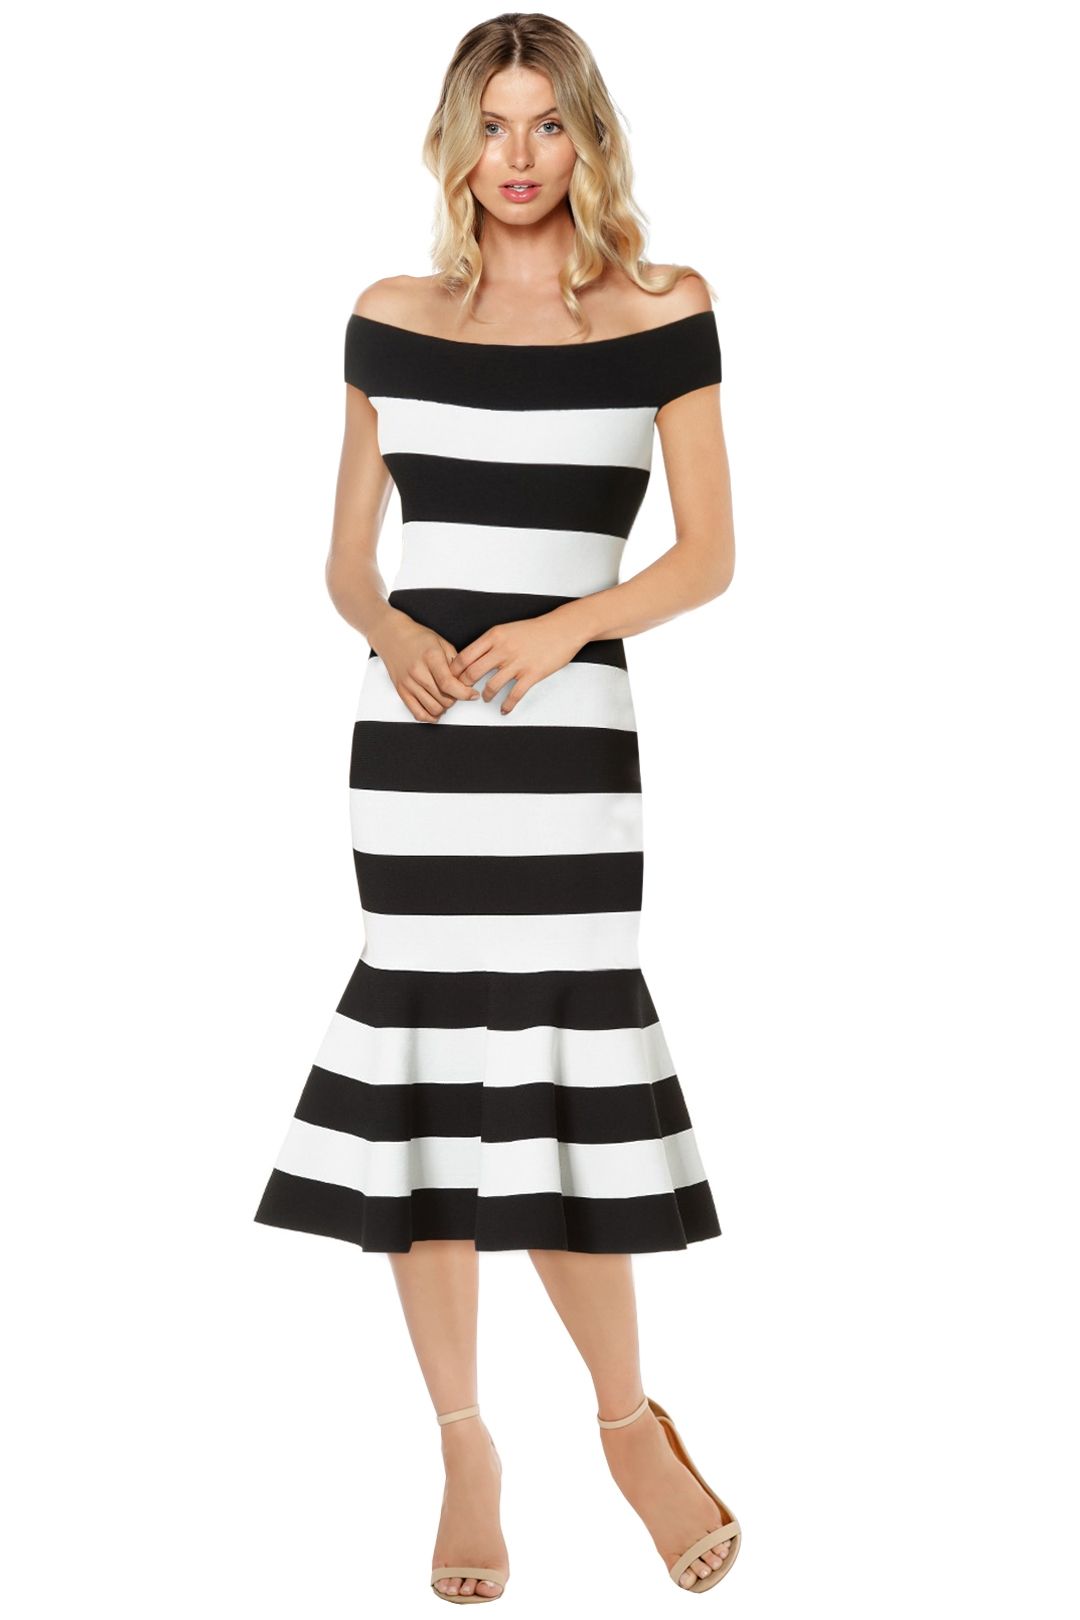 Milly - Mermaid Dress - Black White - Front